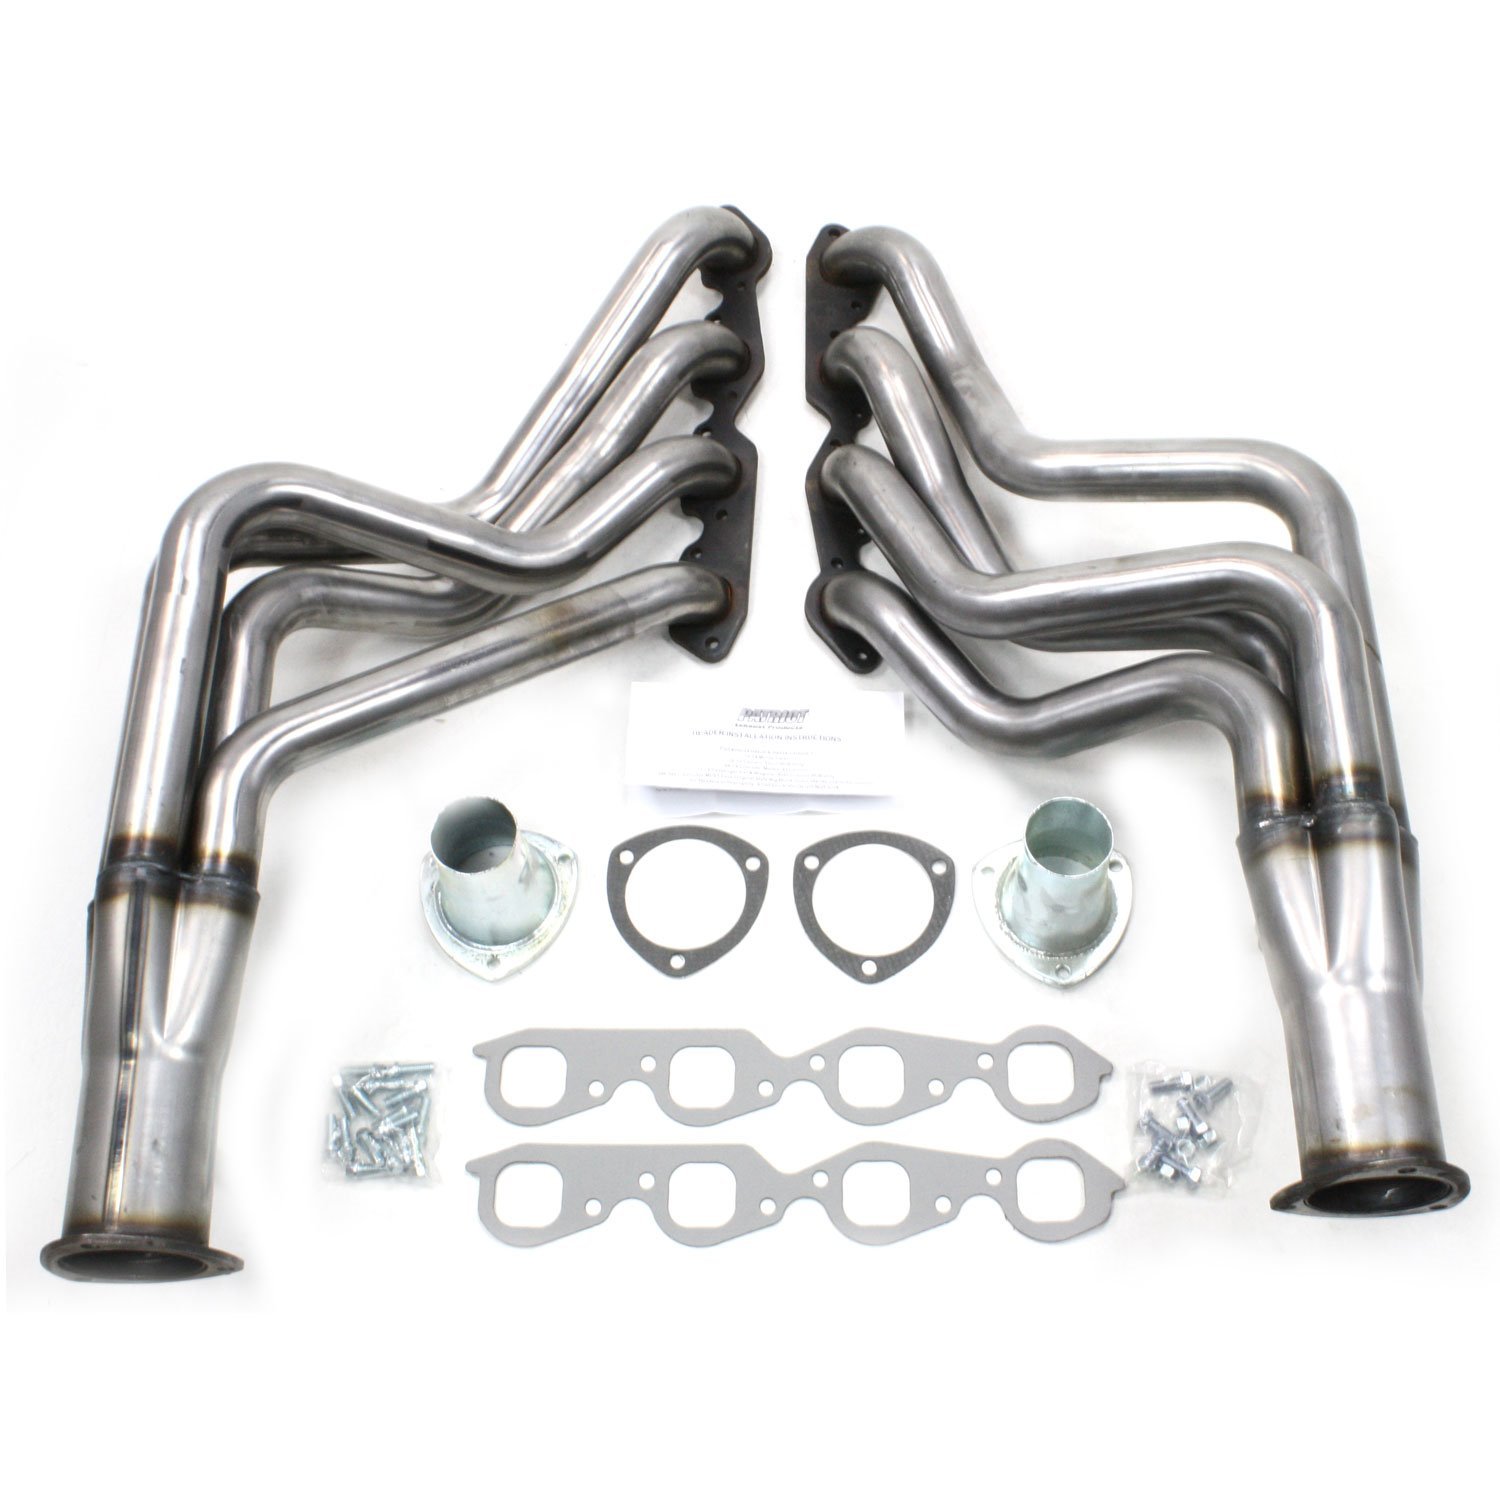 GM Specific Fit Headers 1971-1974 Full Size Passenger Car